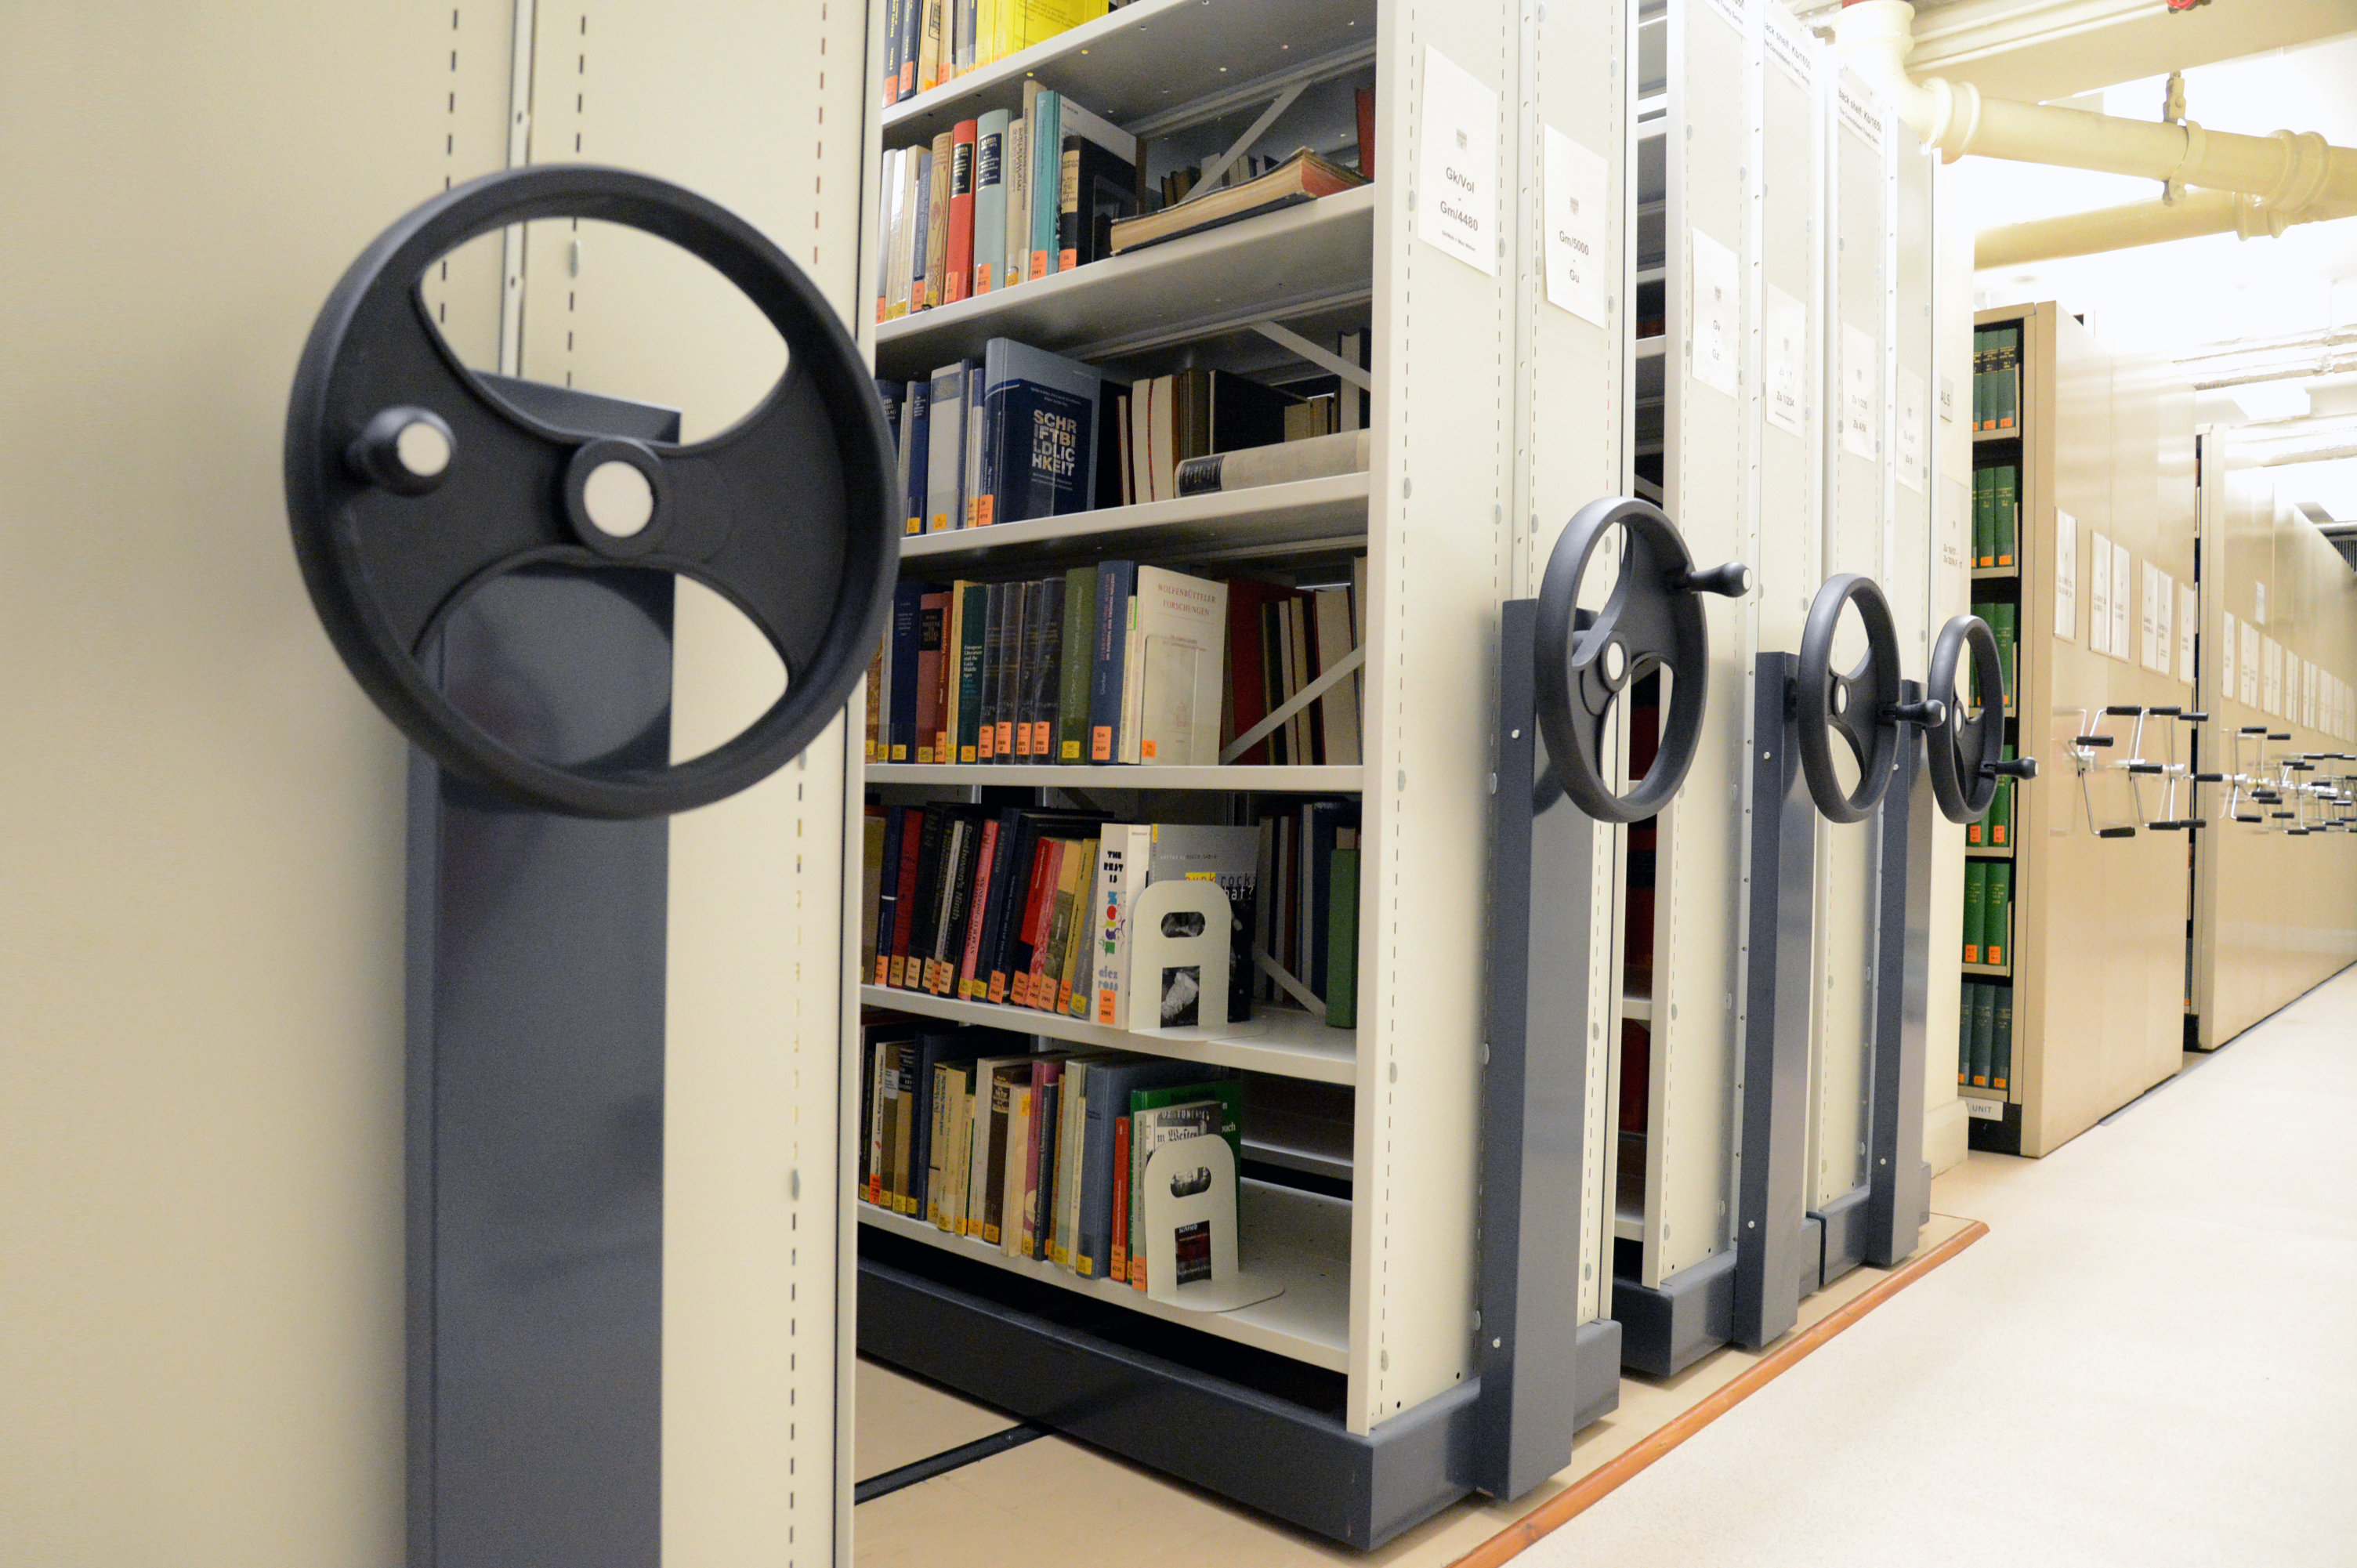 Movable library shelving units with books, the wheels to move the roller racking can be seen in the foreground